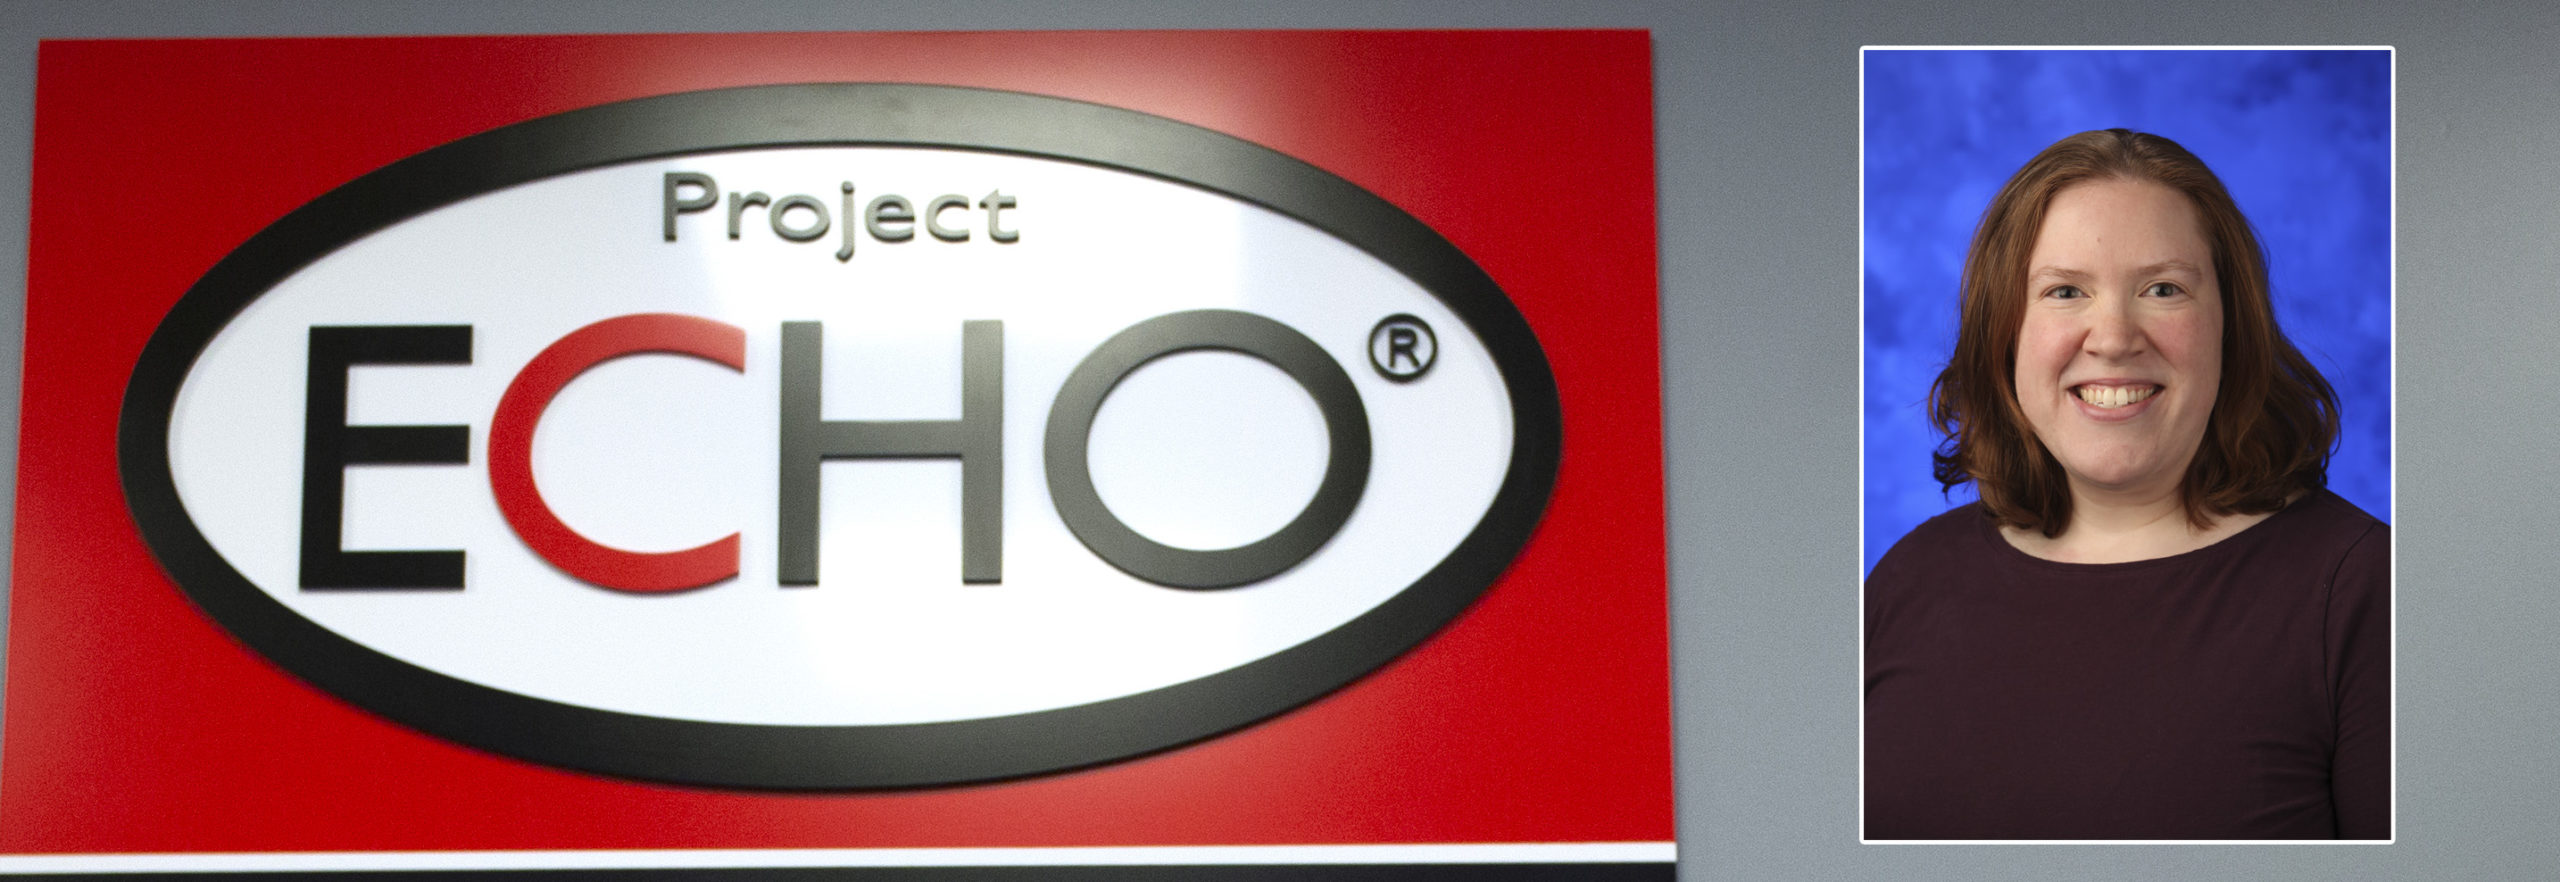 Project ECHO logo with a professional portrait of Abbey Fisher